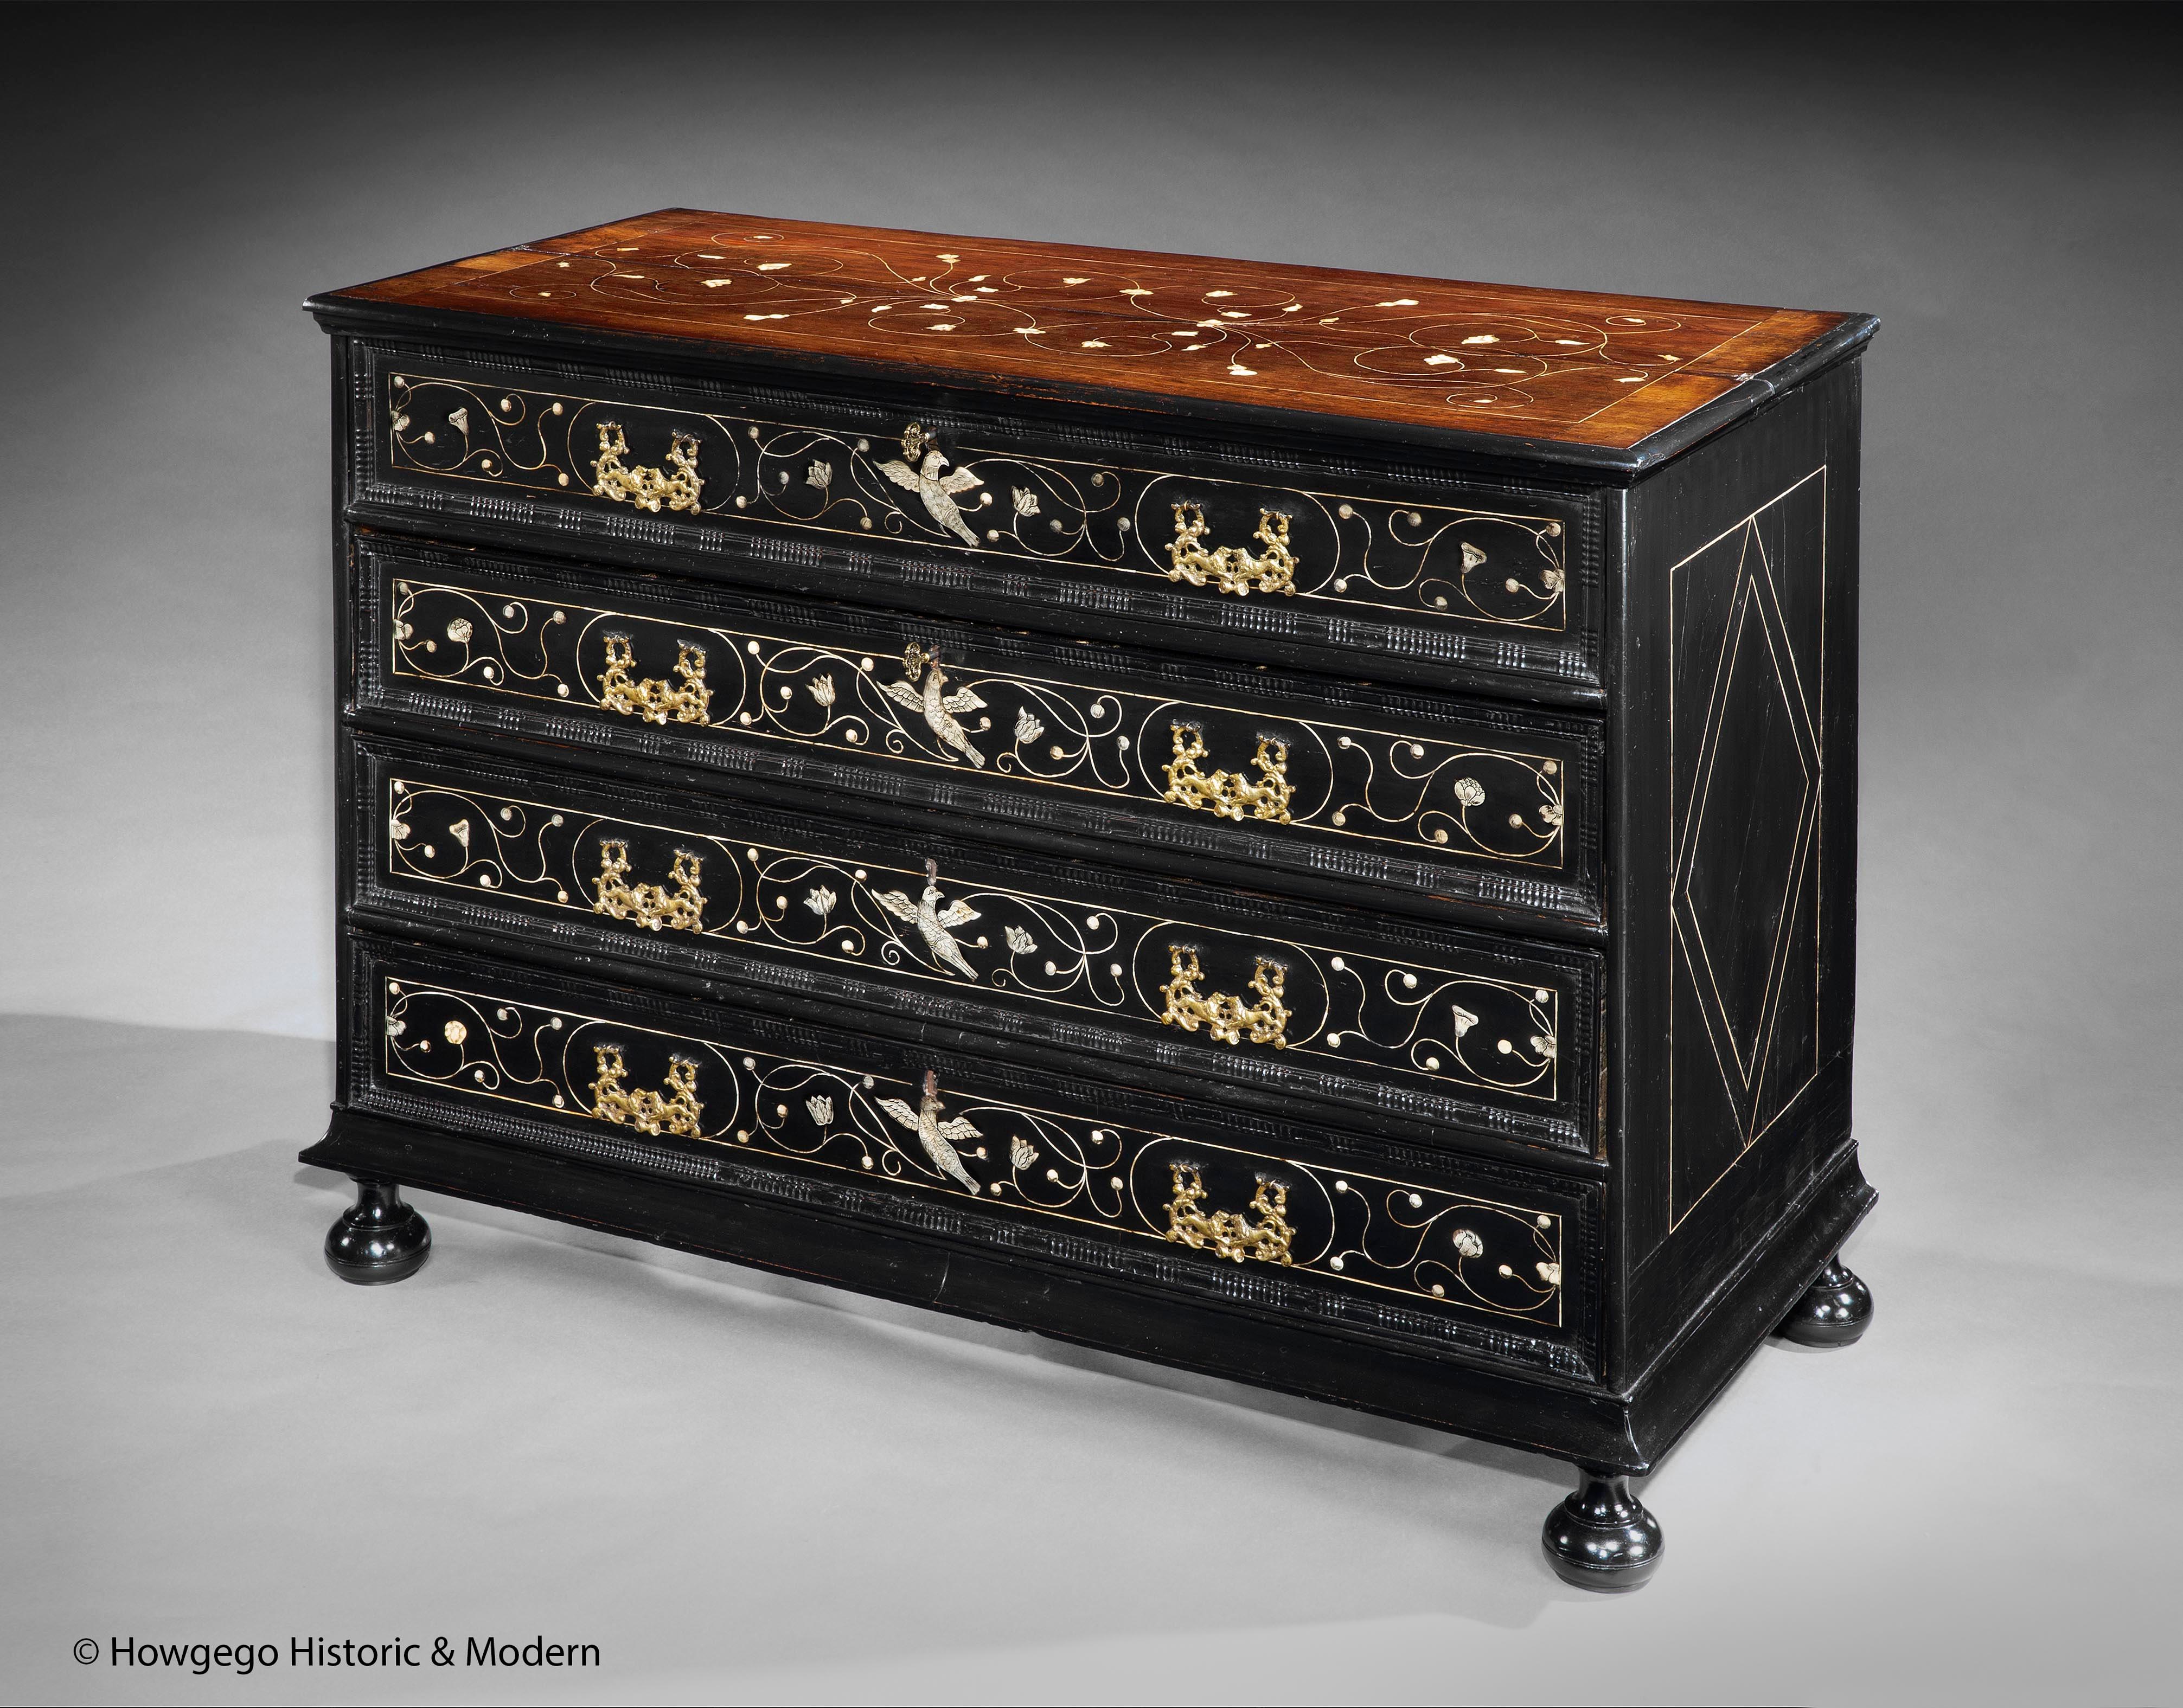 Exceptional Roman Baroque Ebonised, Rosewood Cassettone with bone inlay and magnificent brass handles

Magnificent transition piece displaying classical ornamentation within a traditional Baroque form
Conceived to be a statement piece with contrast